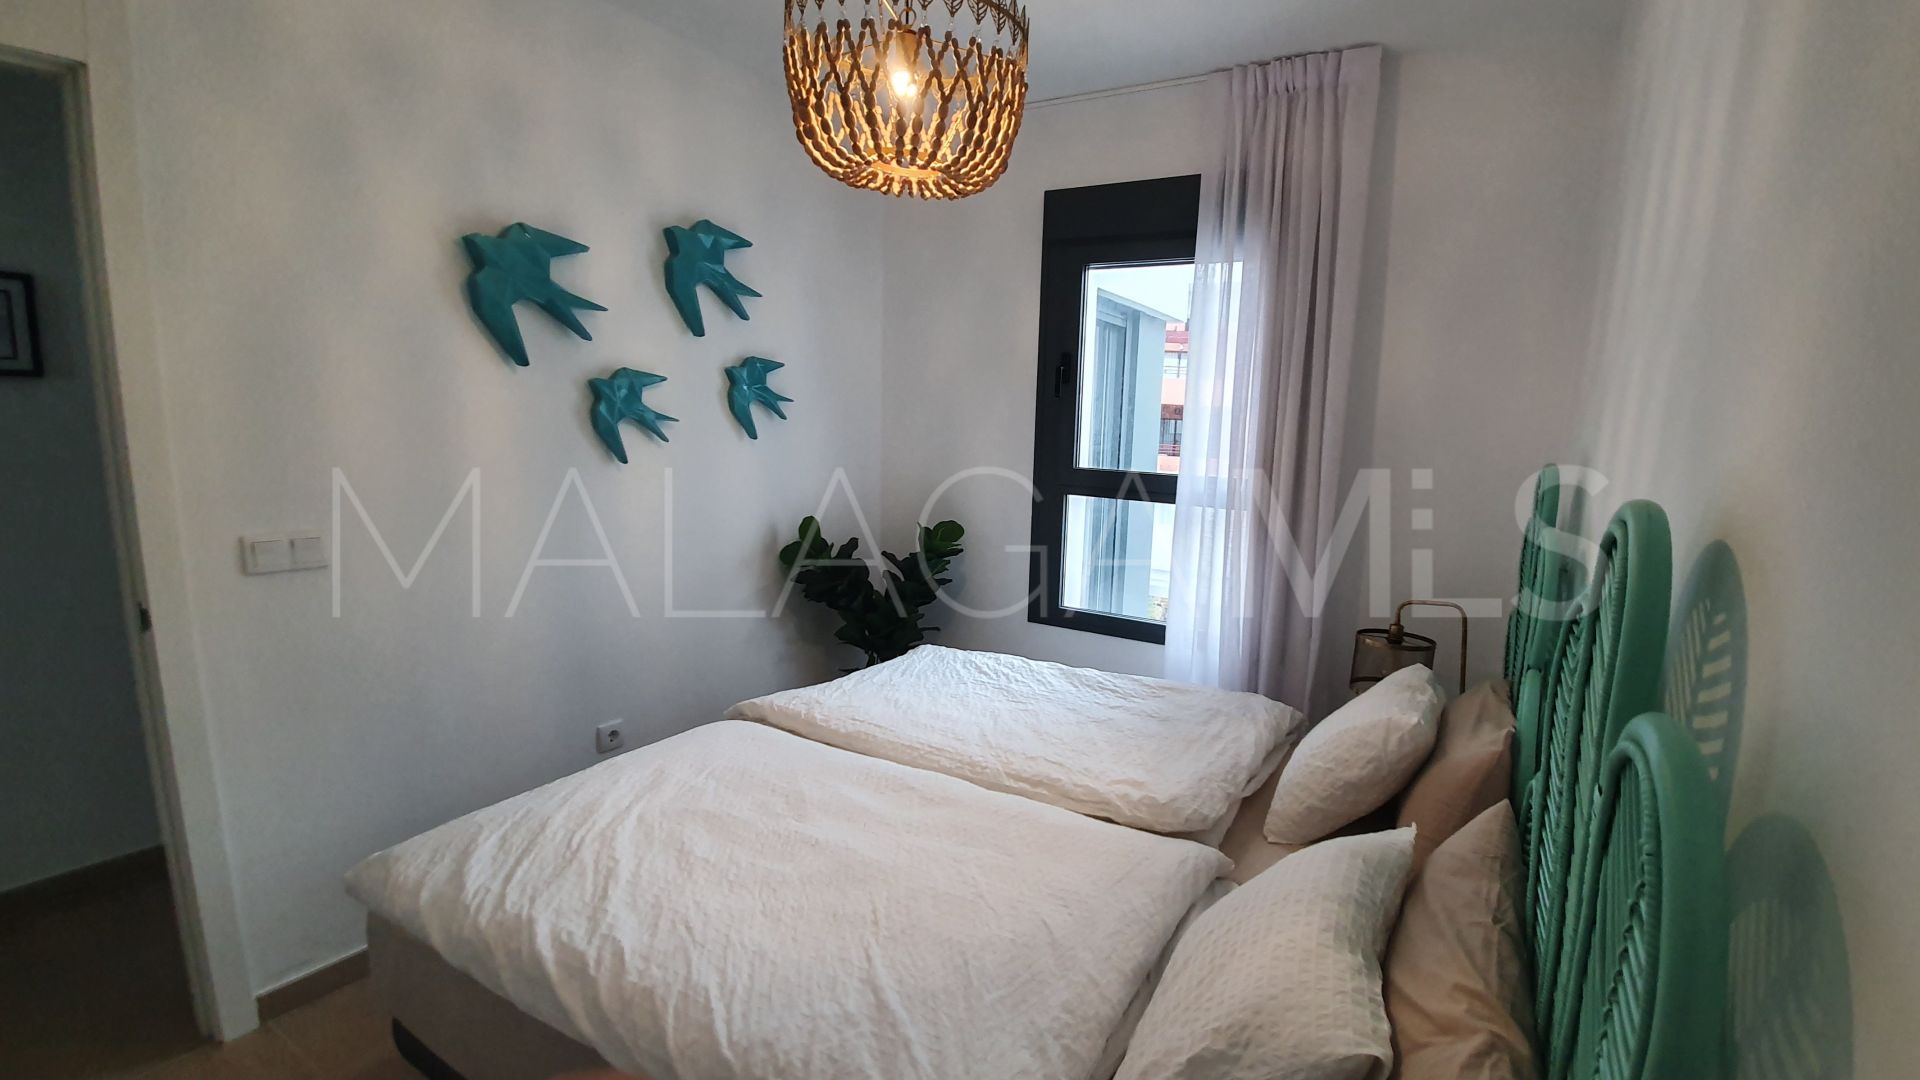 Atico for sale with 2 bedrooms in Manilva